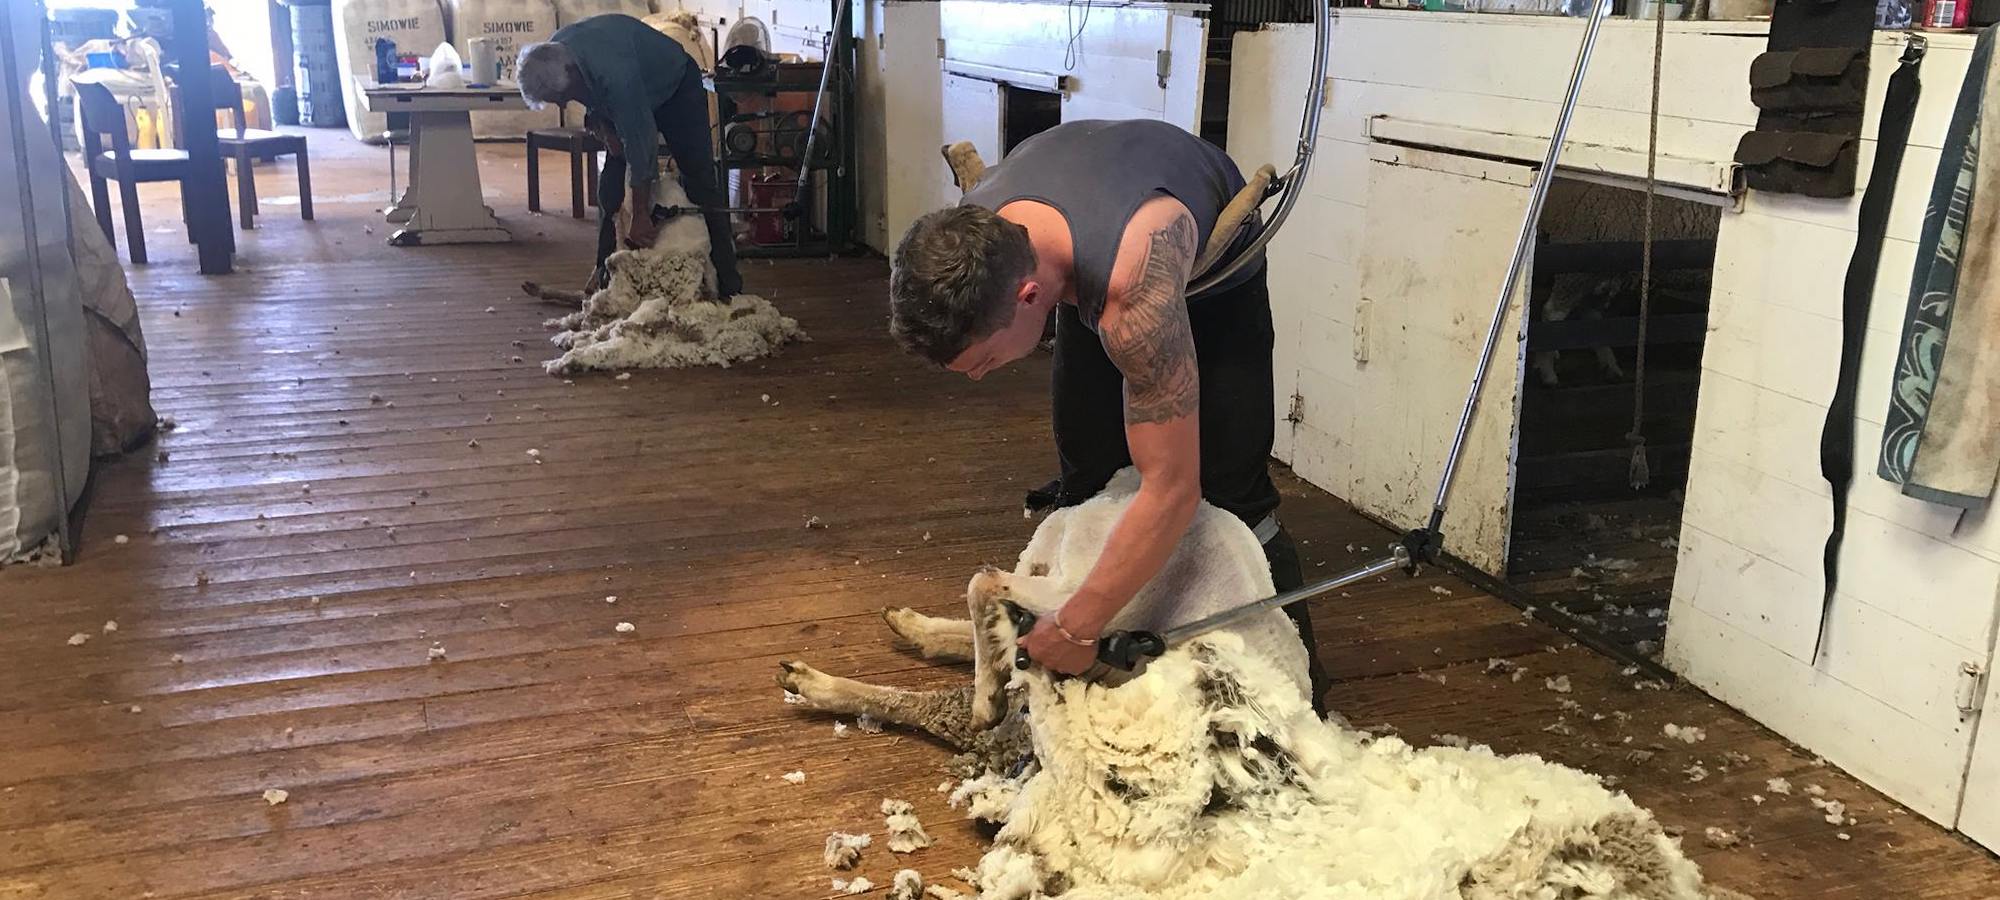 Jamestown’s one-armed shearer defying the odds